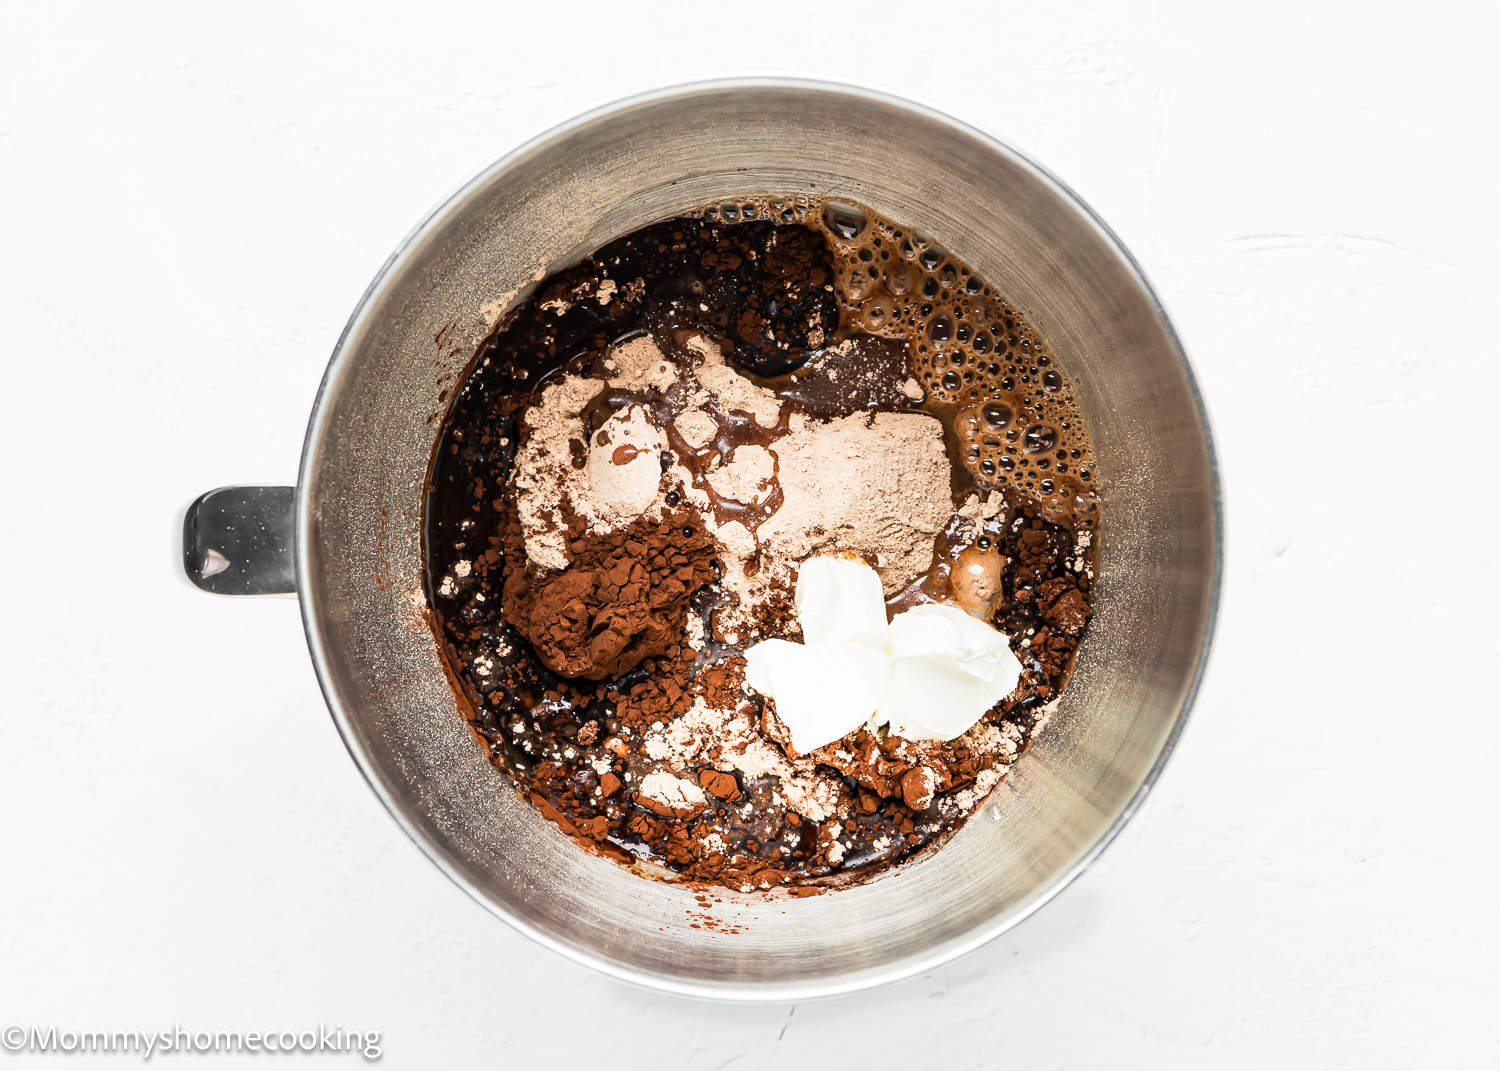 Ingredients in a metal bowl on a white background for boxed brownies made without eggs.